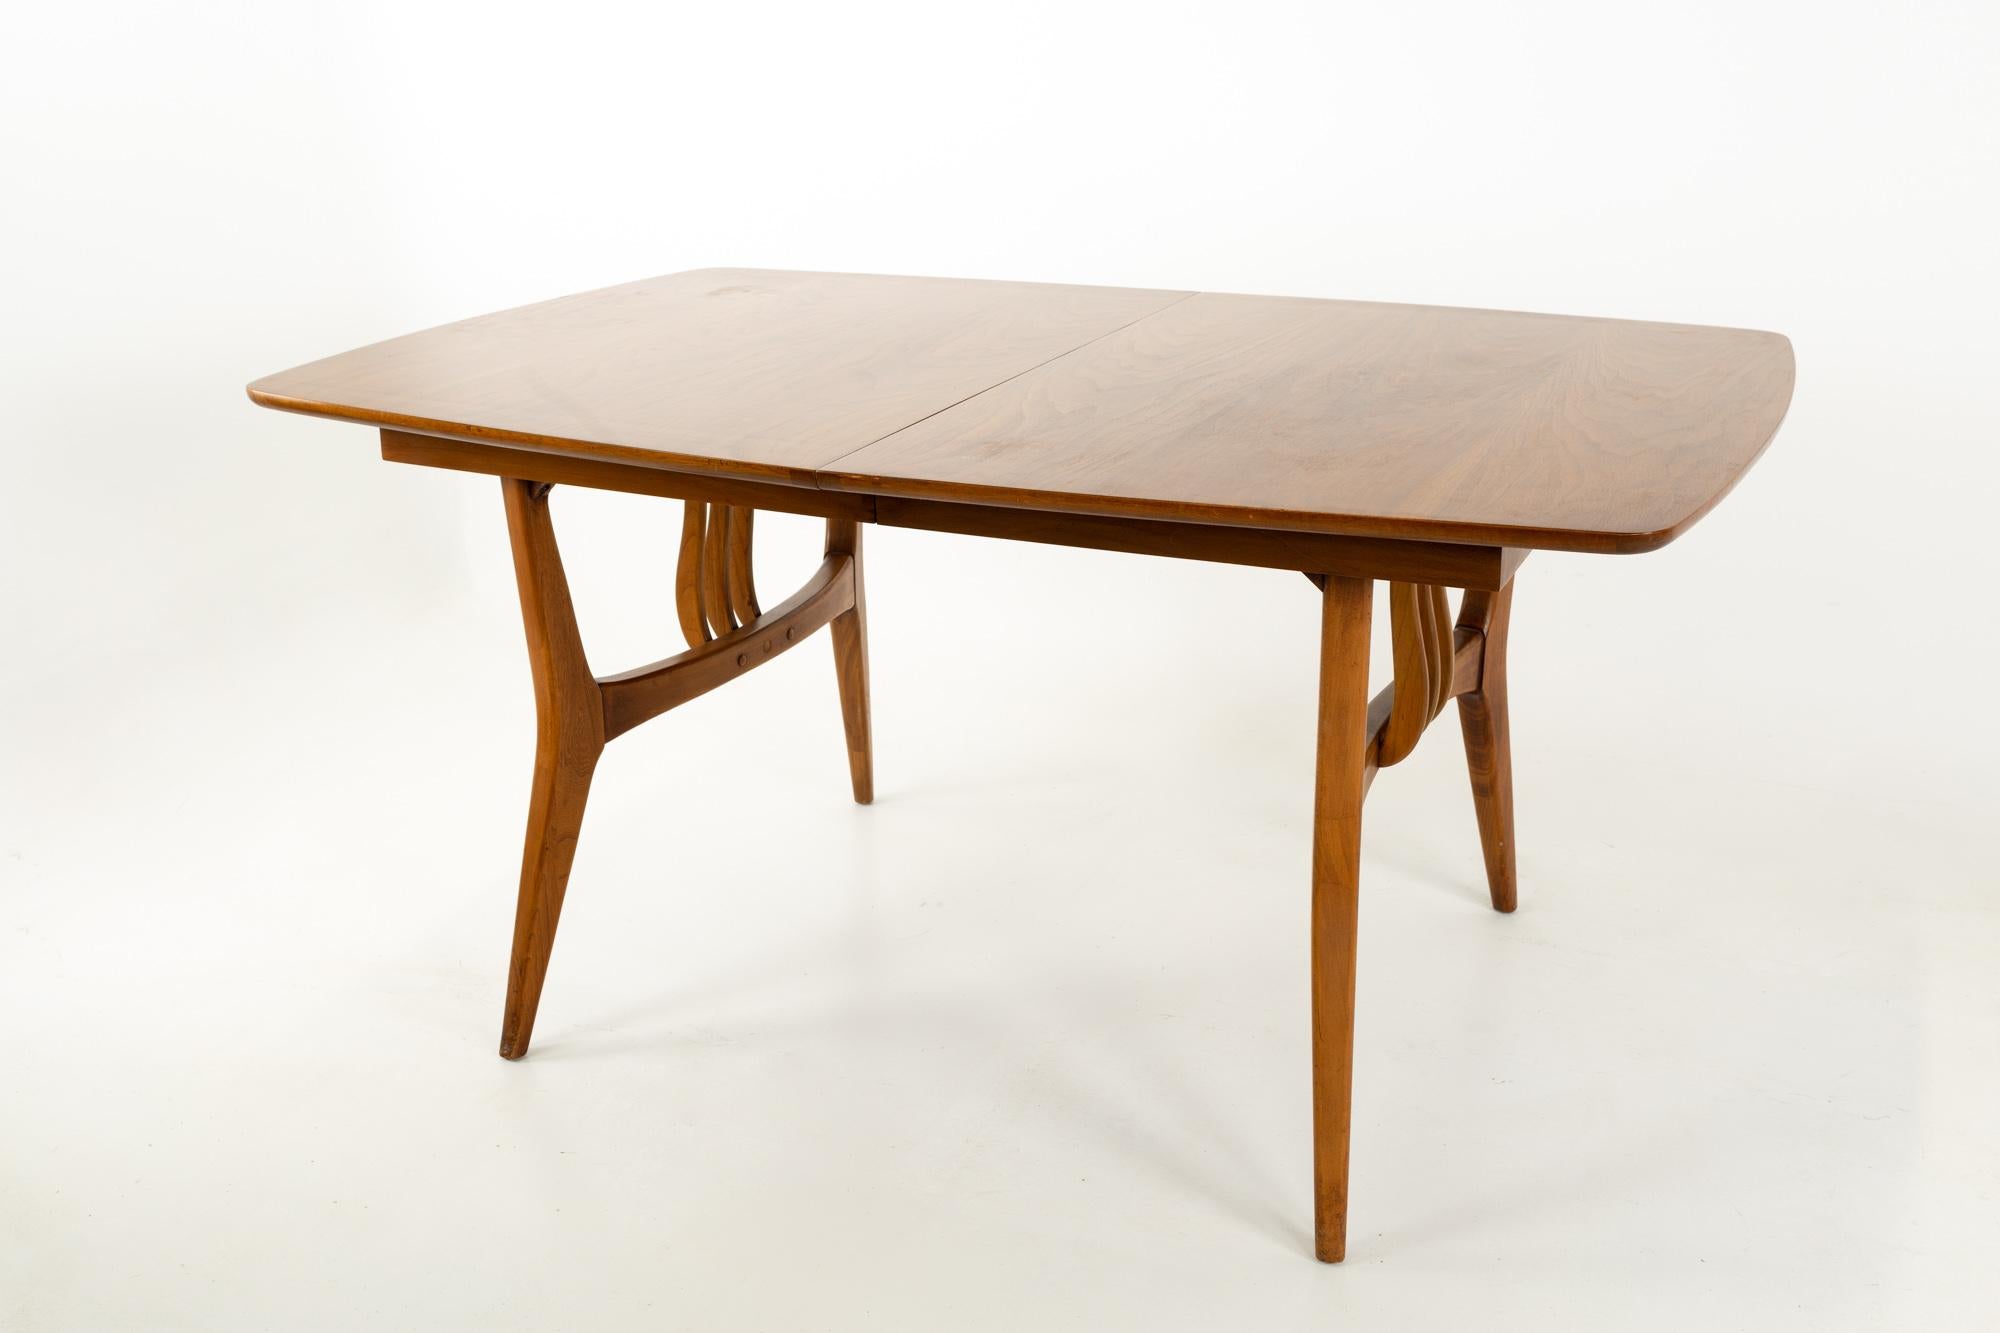 Blowing rock mid century 10 person walnut surfboard dining table
This table is 60 wide x 39.5 deep x 29.5 inches high, and each of the leaves is 12 inches wide, making the table a total of 96 inches wide with the 3 leaves installed

Each piece of